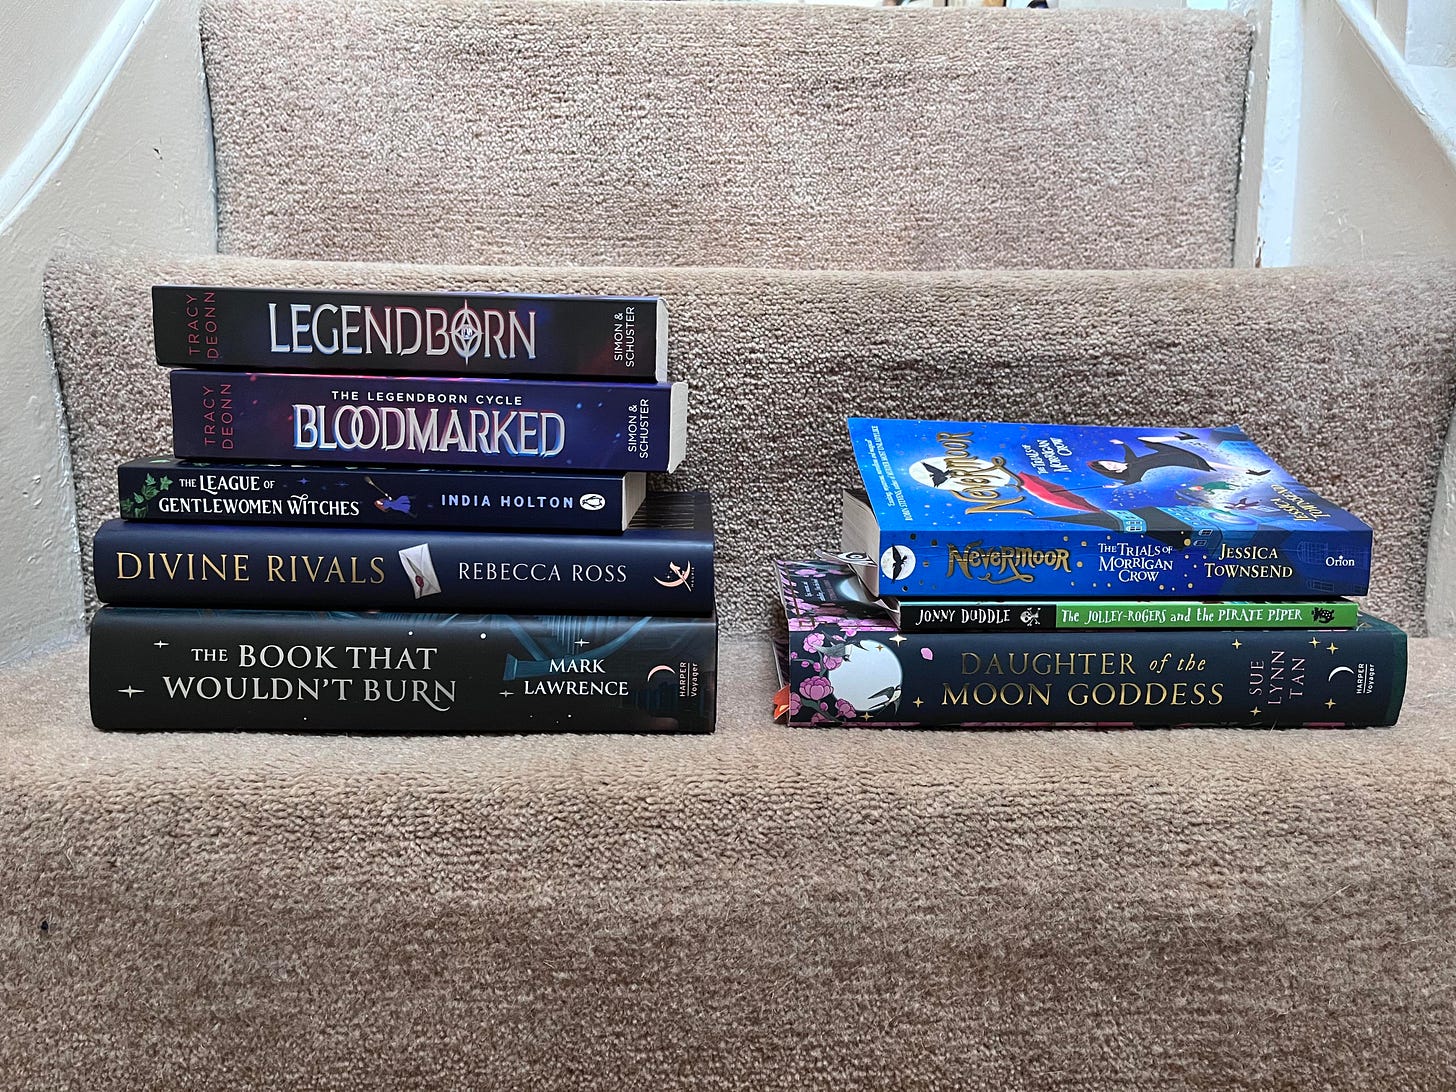 Two piles of books sitting next to each other on cream coloured carpet. The pile on the left includes The Book That Wouldn't Burn; Divine Rivals; The League of Gentlewomen Witches; Blookmarked; Legendborn. The pile on the right includes: Nevermoor; The Jolly Rogers and the Pirate Piper; Daughter of the Moon Goddess.